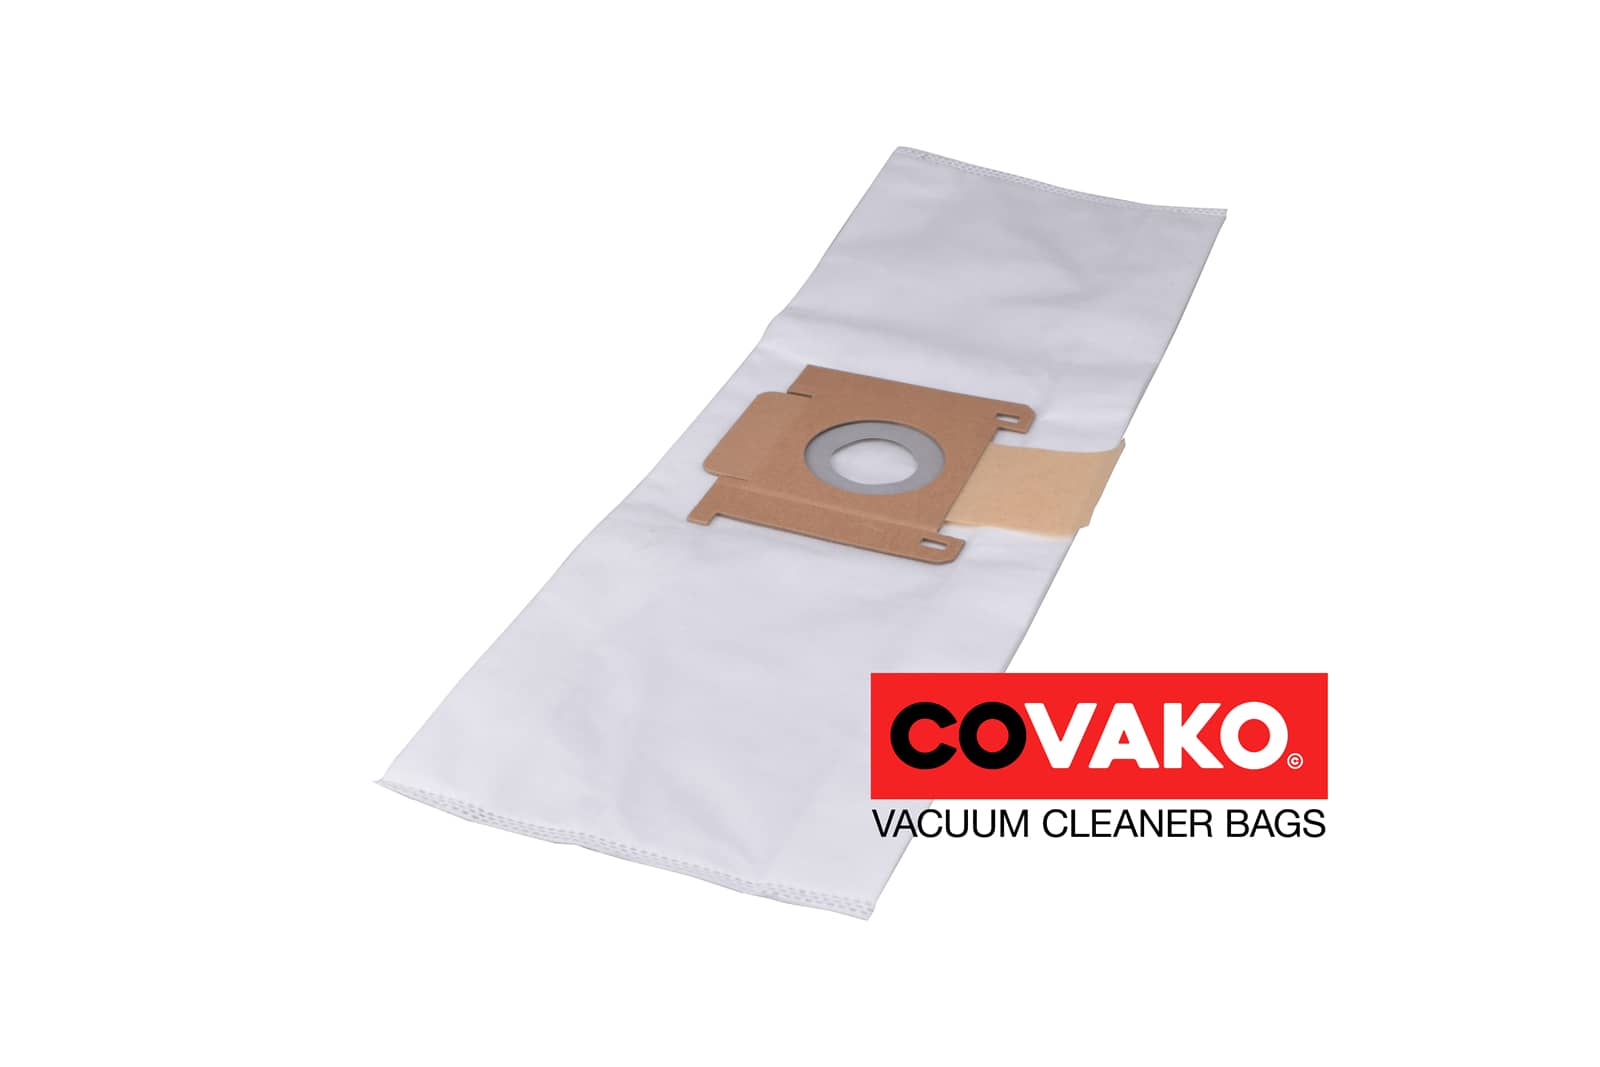 Ivac I-vac C5 / Synthesis - Ivac vacuum cleaner bags